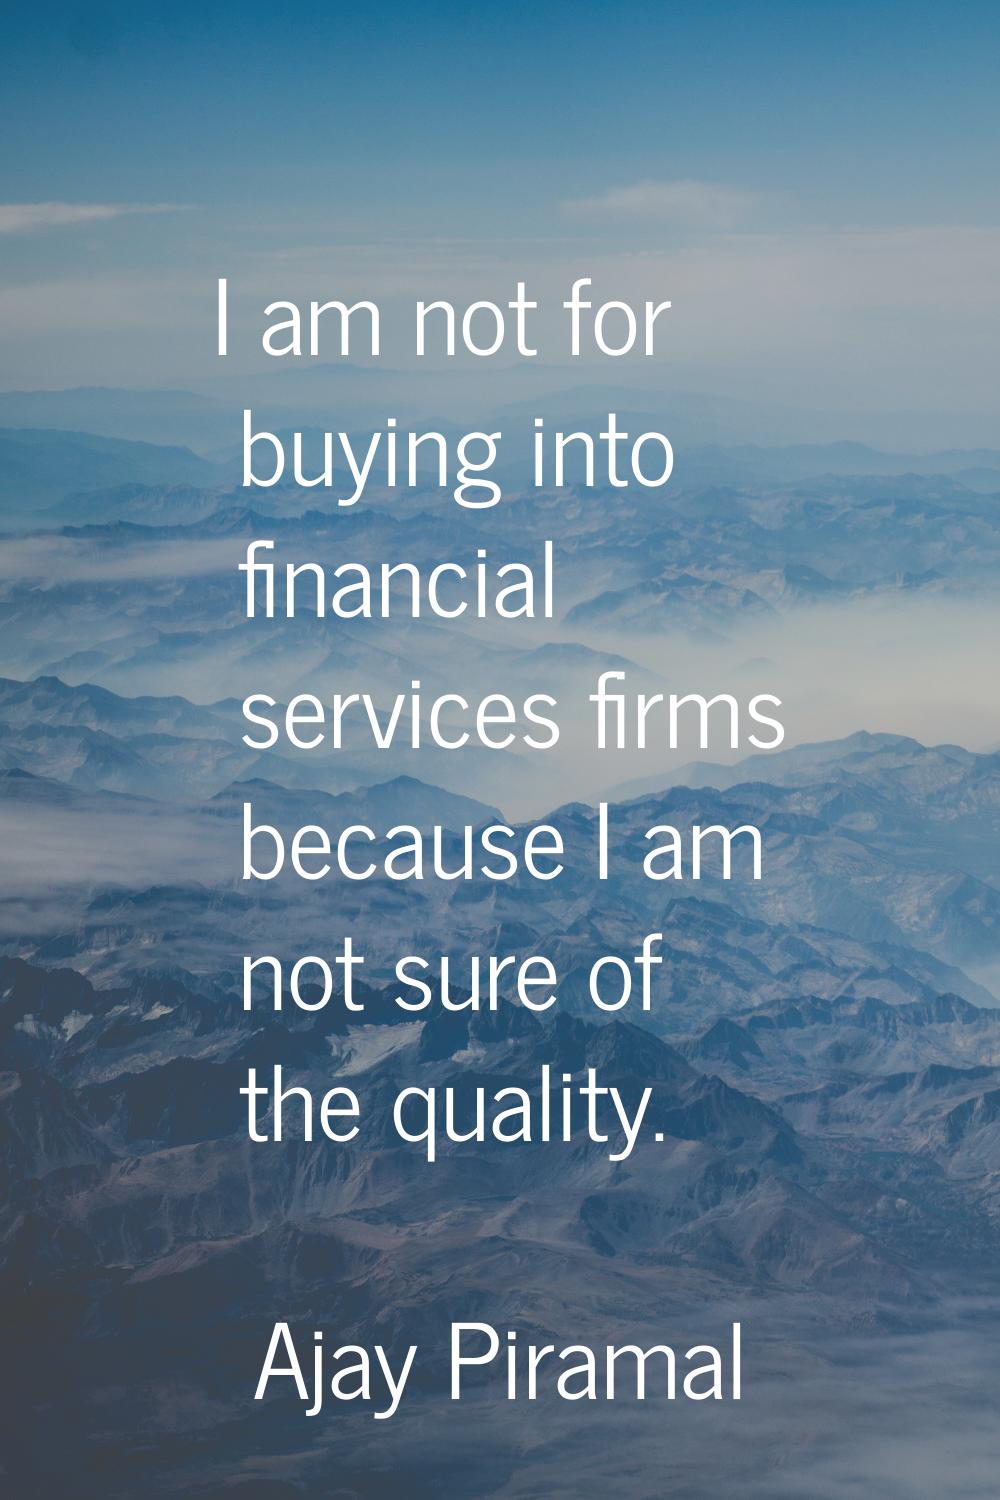 I am not for buying into financial services firms because I am not sure of the quality.